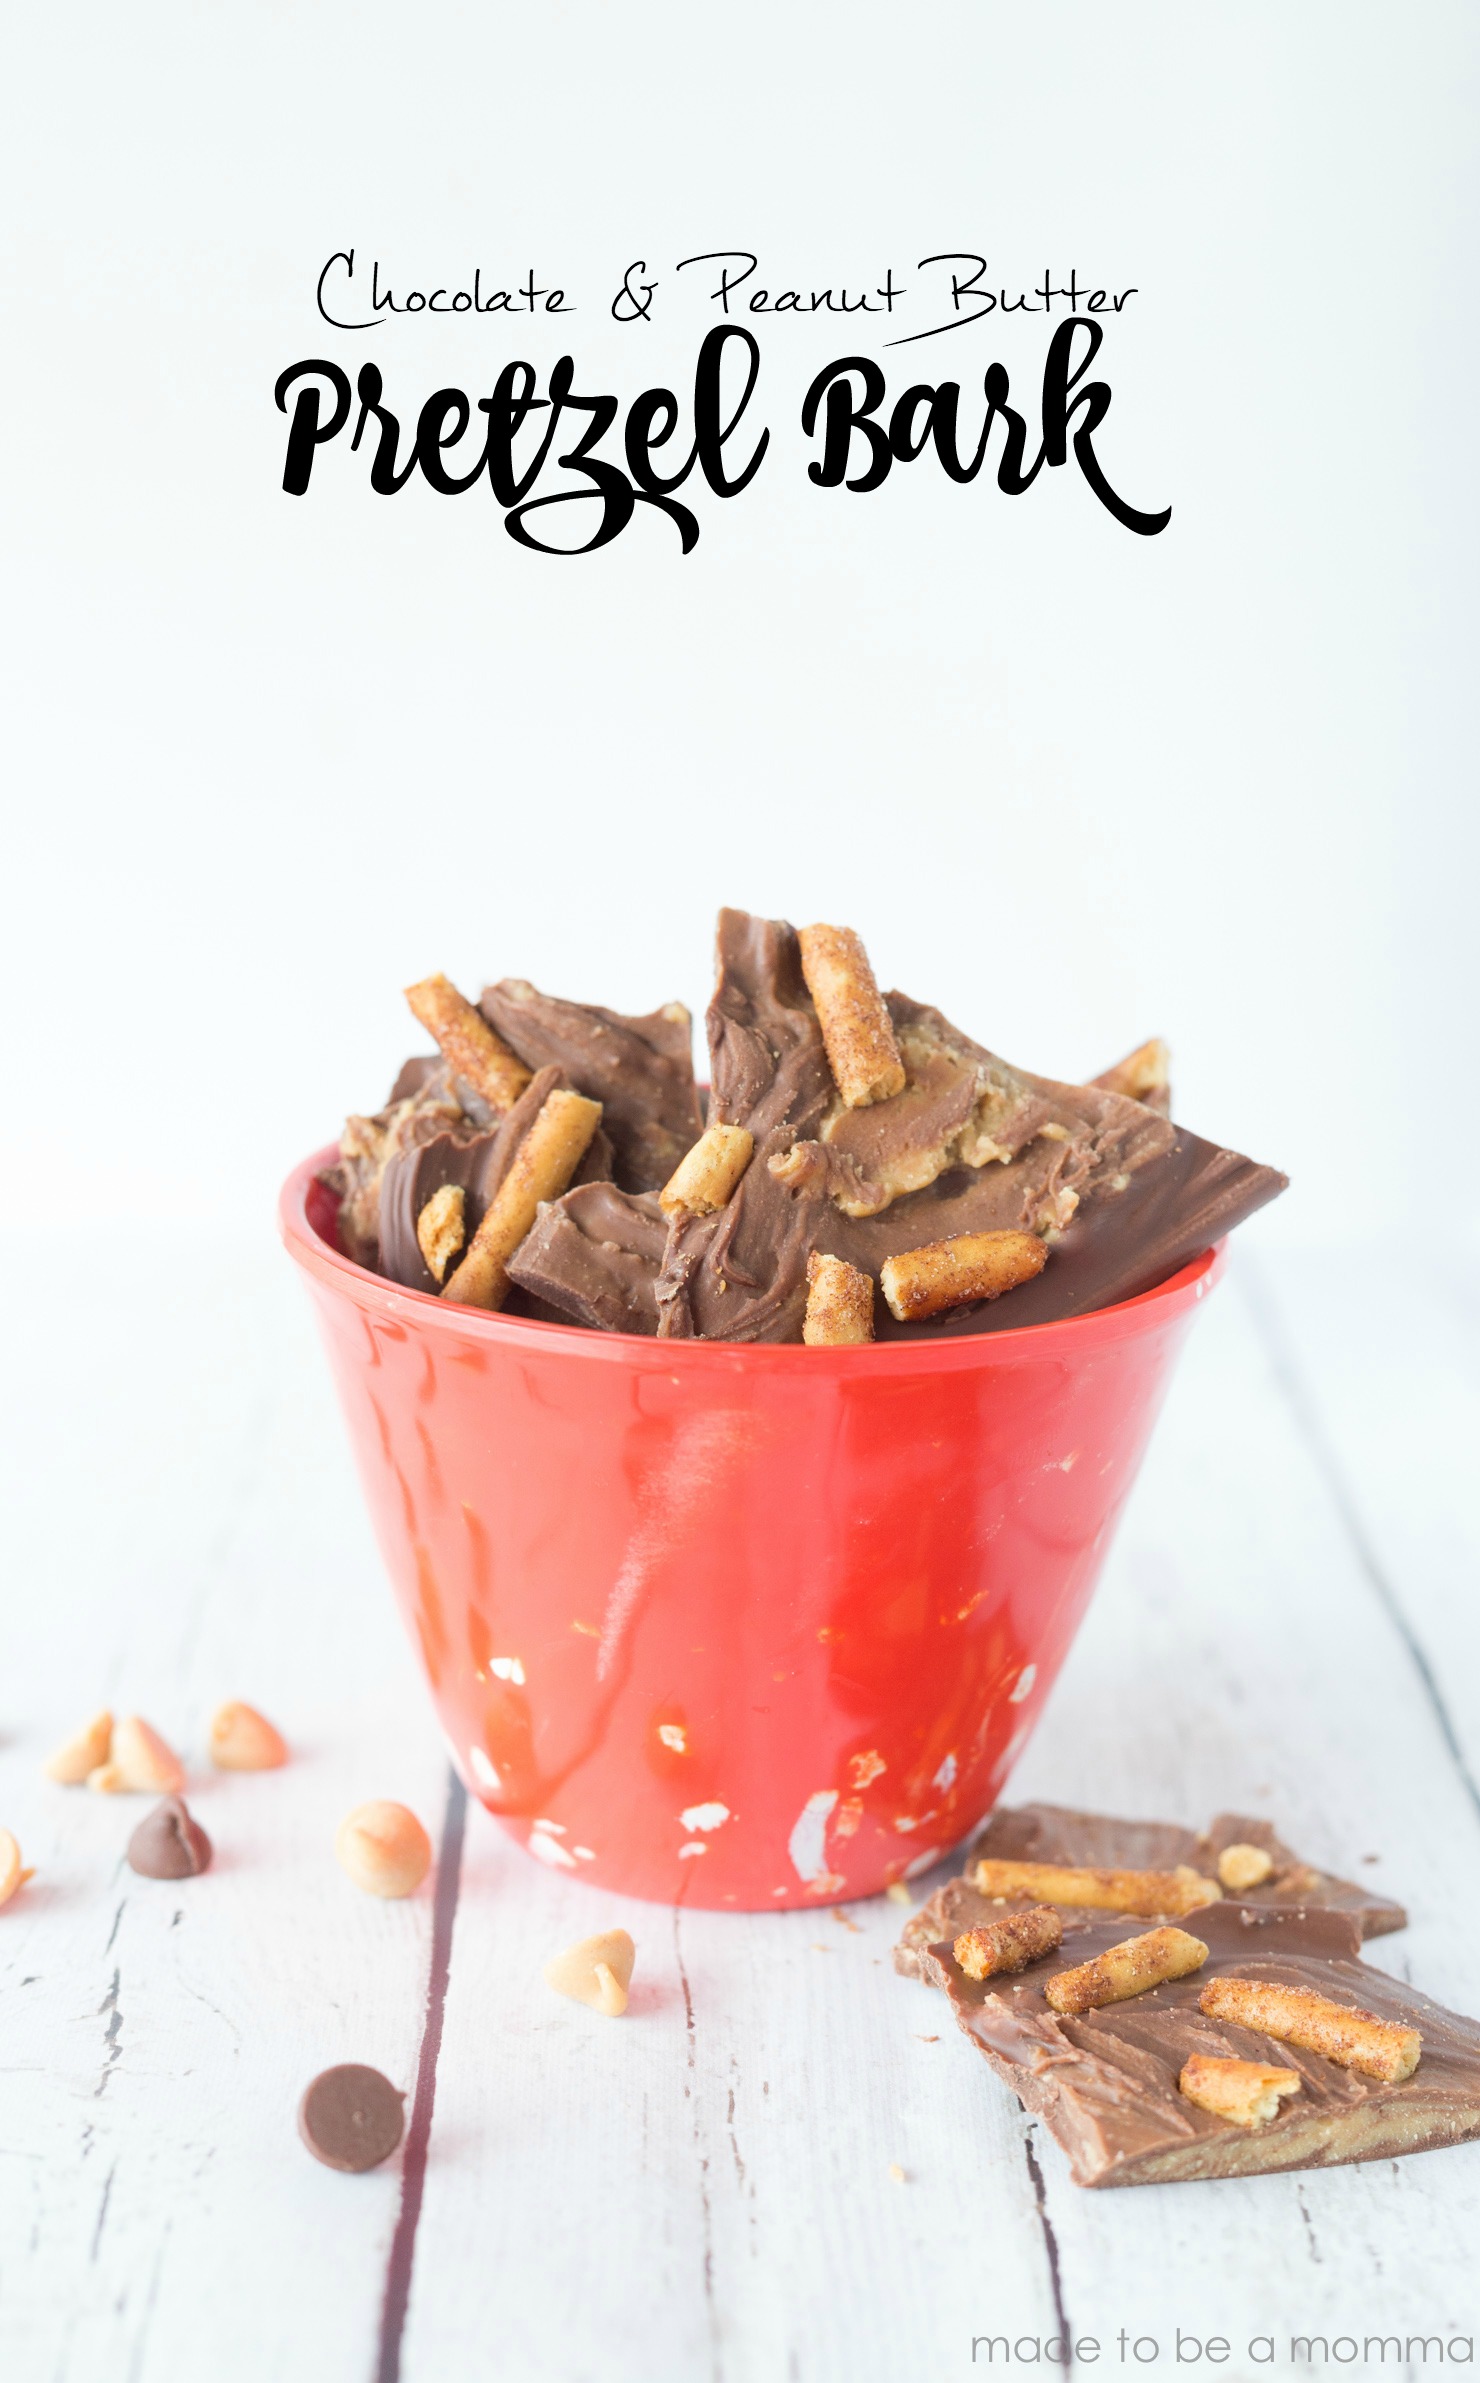 This Chocolate & Peanut Butter Pretzel Bark is simple and delicious! Who doesn't love the mix of chocolate and peanut butter?